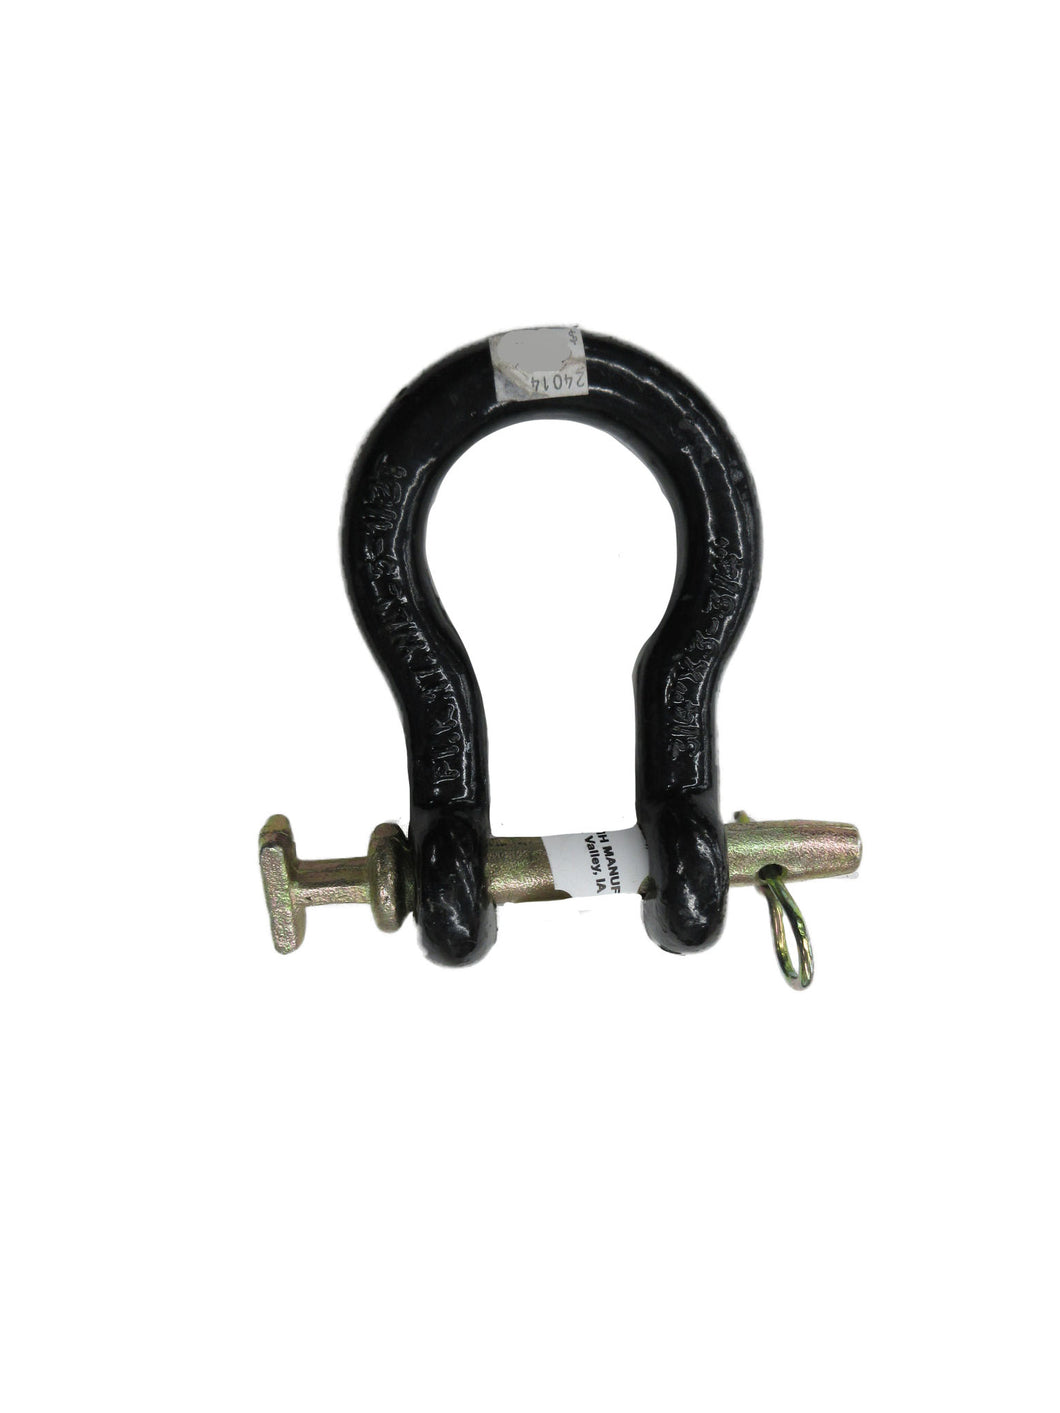 Clevis Pin, 3/4